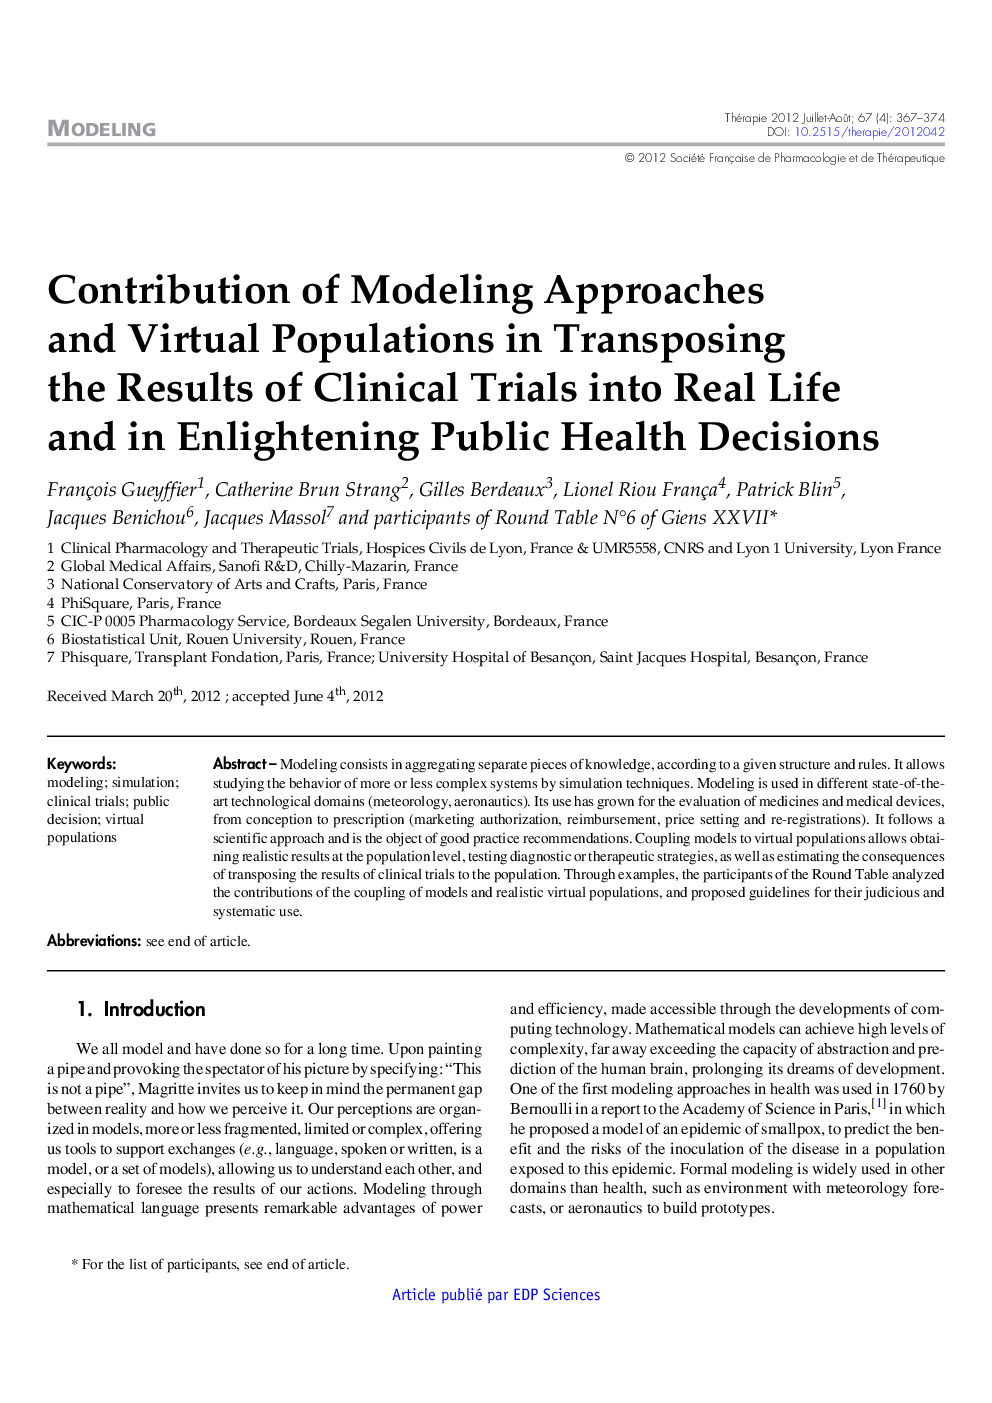 Contribution of Modeling Approaches and Virtual Populations in Transposing the Results of Clinical Trials into Real Life and in Enlightening Public Health Decisions